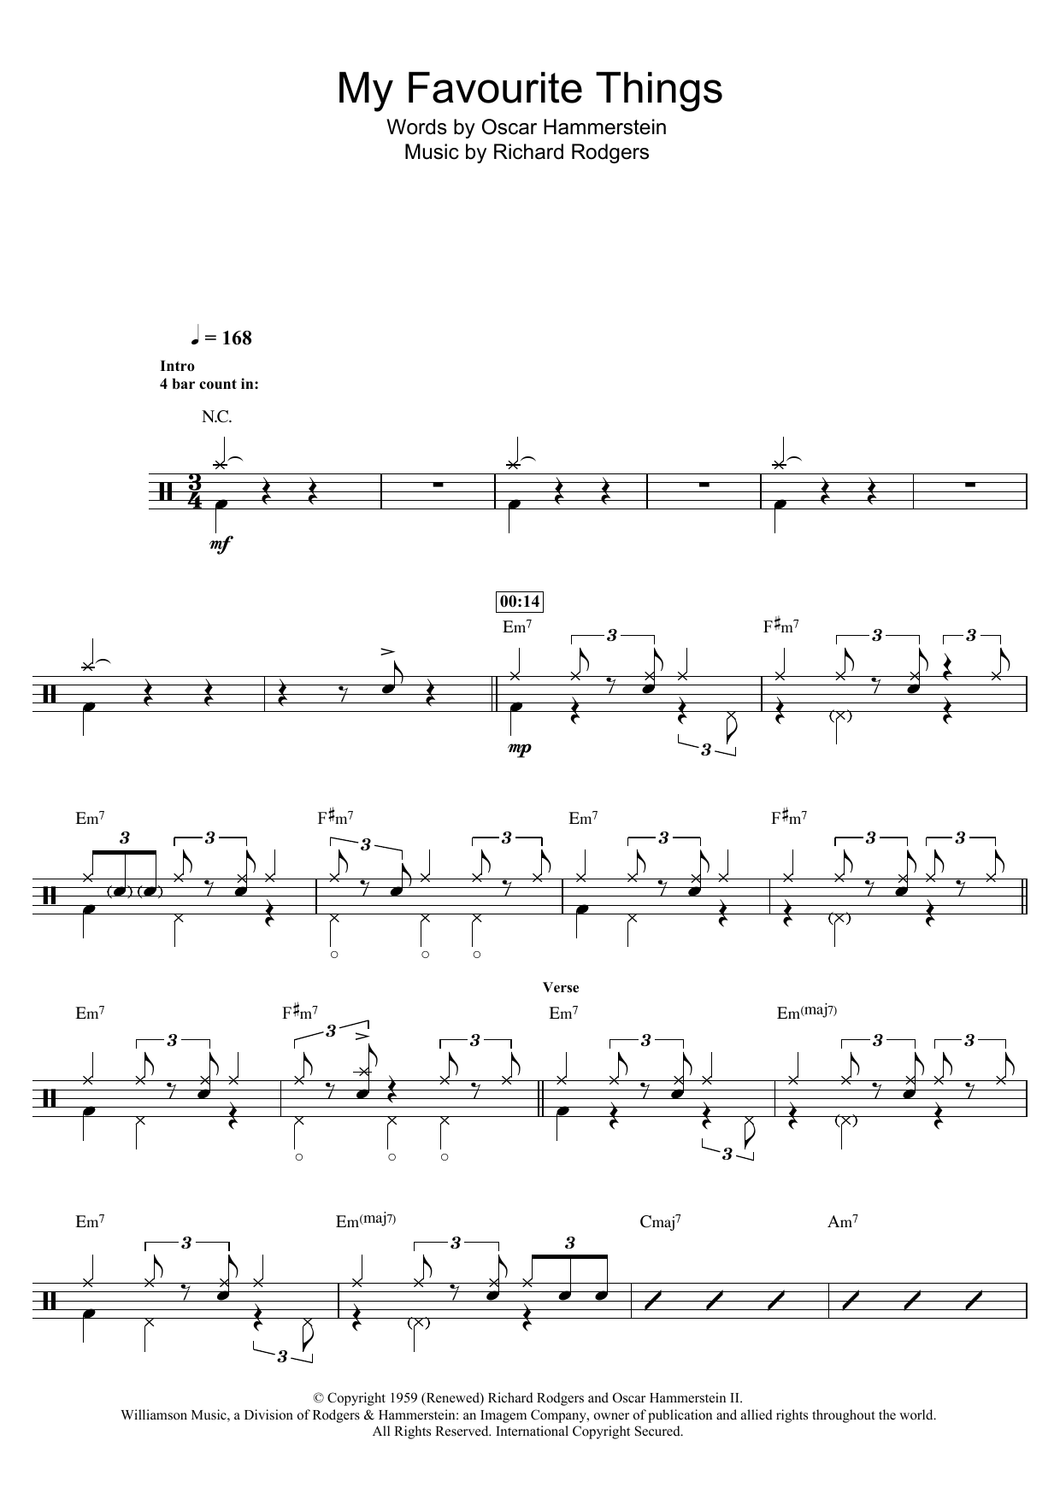 My Favorite Things (from The Sound Of Music) - John Coltrane - Full Drum Transcription / Drum Sheet Music - SheetMusicDirect D